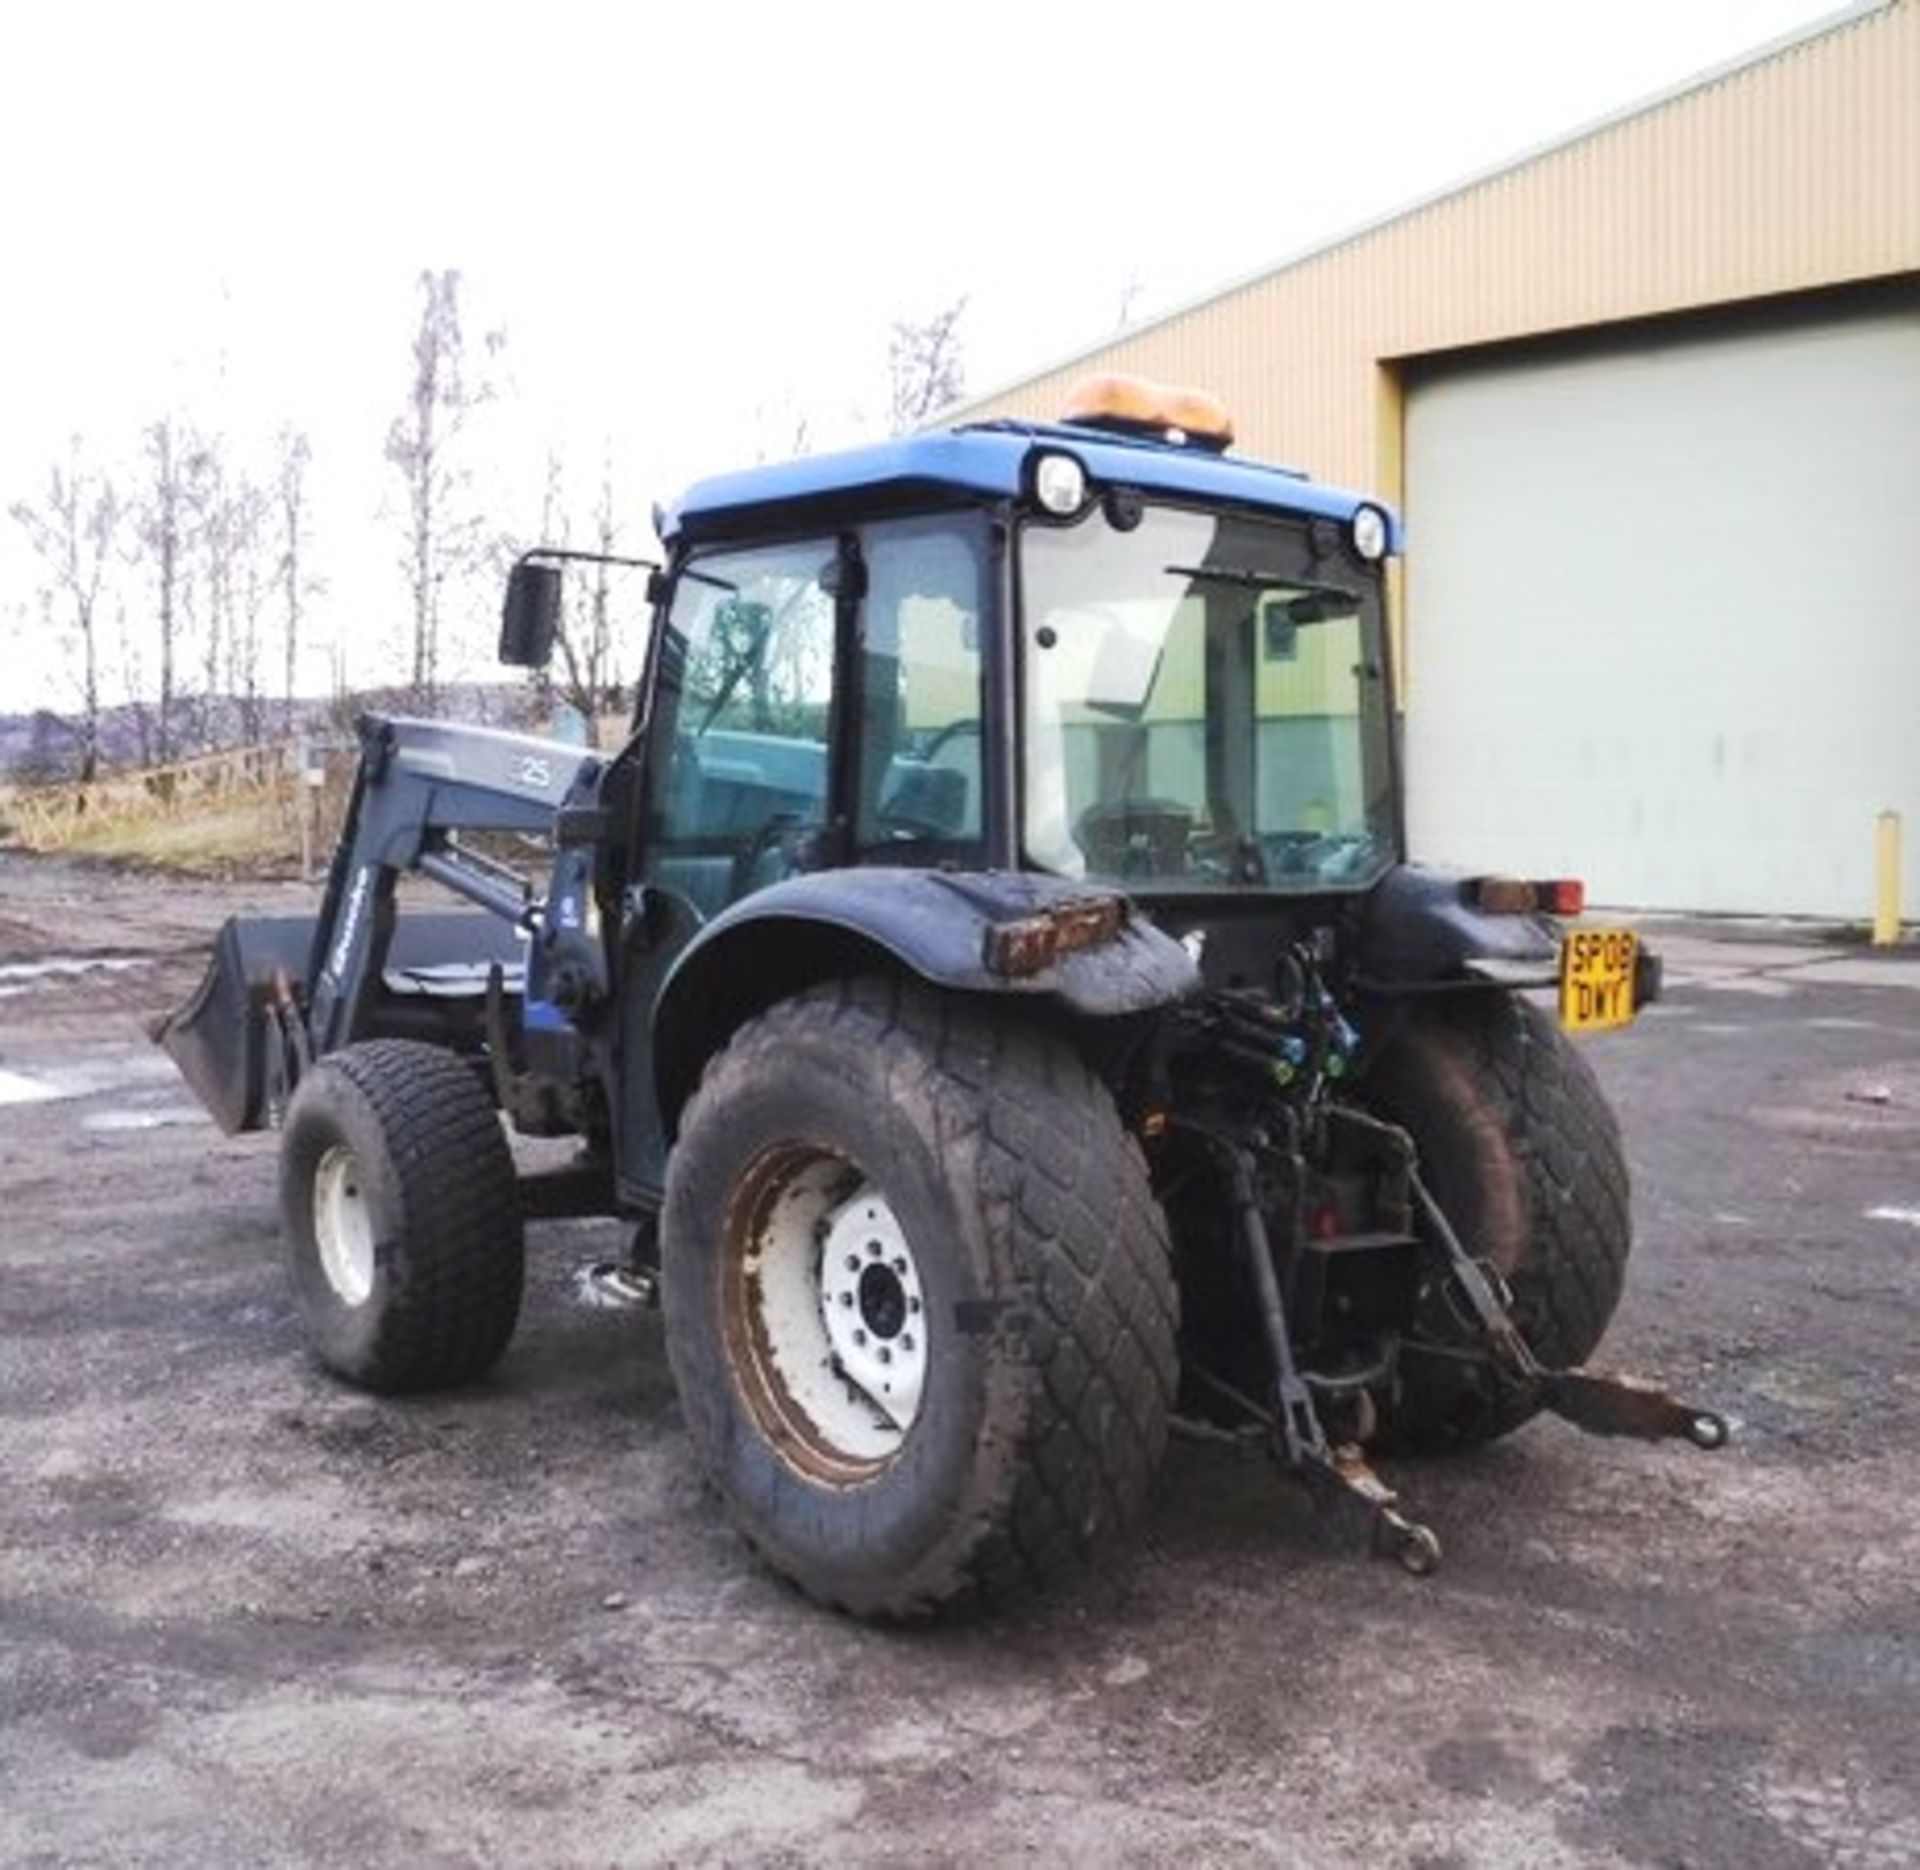 2008 NEW HOLLAND TN60 TRACTOR. REG NO SP08 DWY. SN 111054. GVW(TONNES) 4497, 3062HRS (NOT VERIFIED) - Image 5 of 40